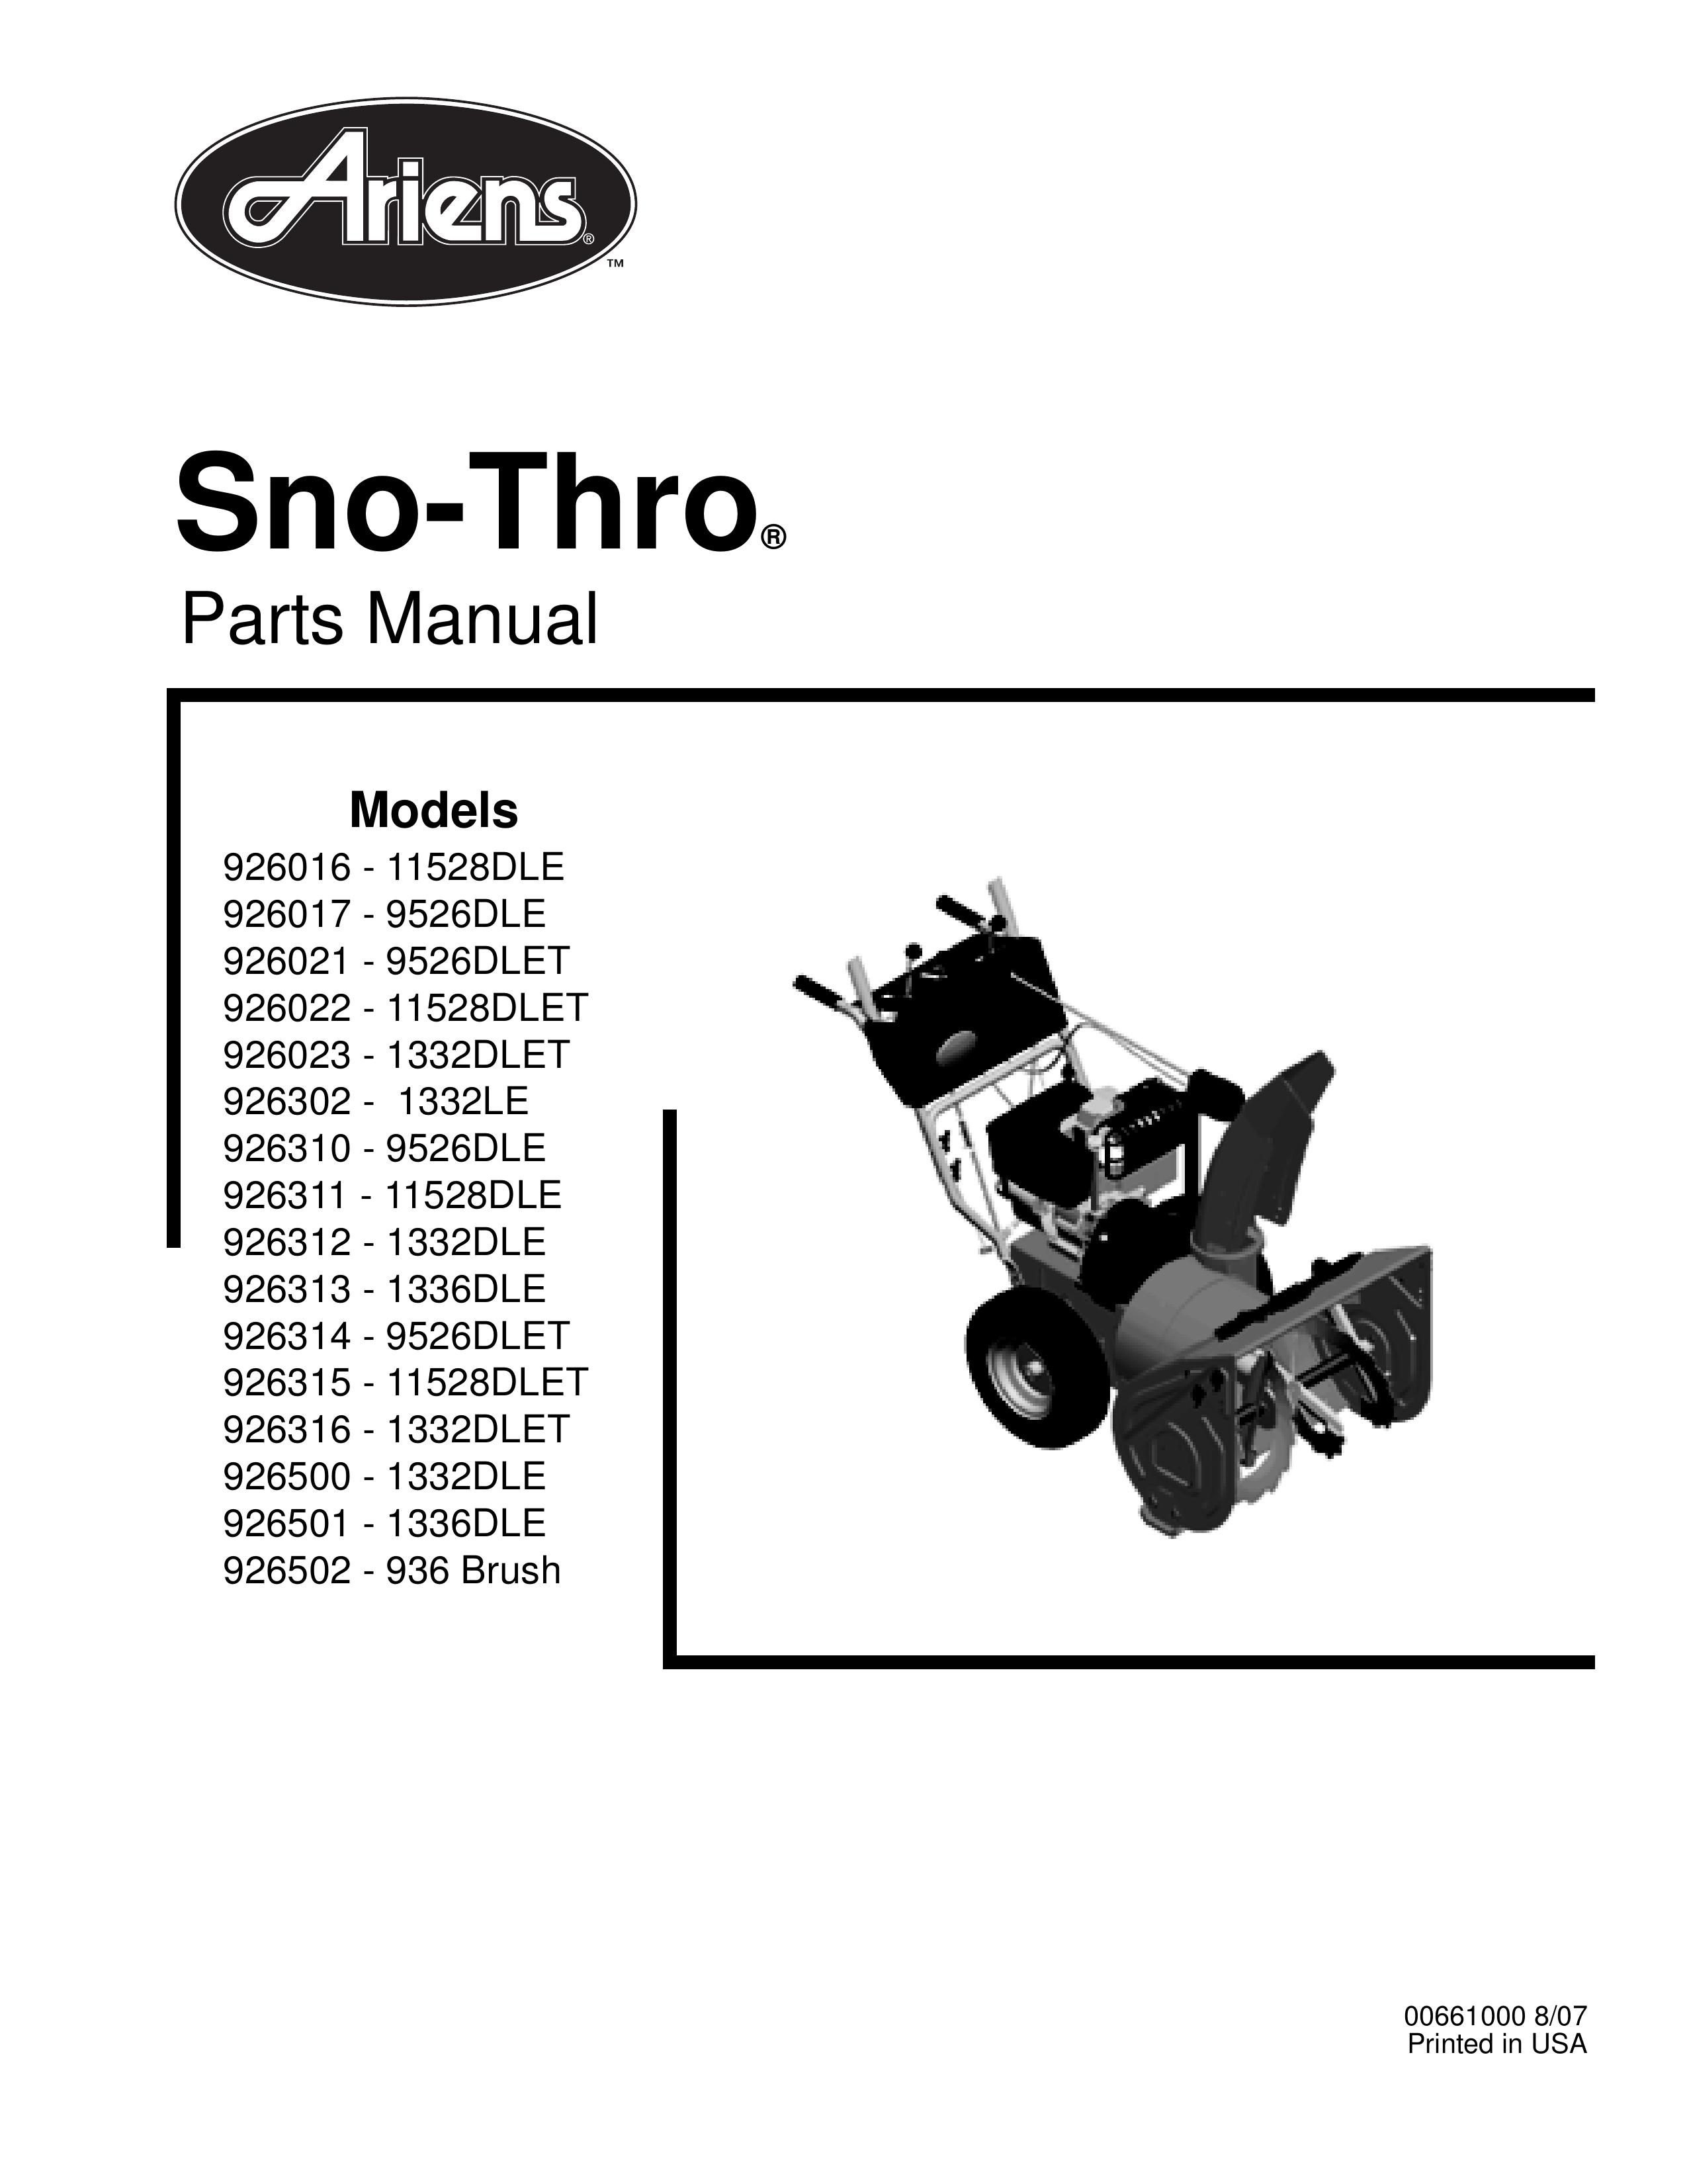 Ariens 926501 - 1336DLE Snow Blower Attachment User Manual